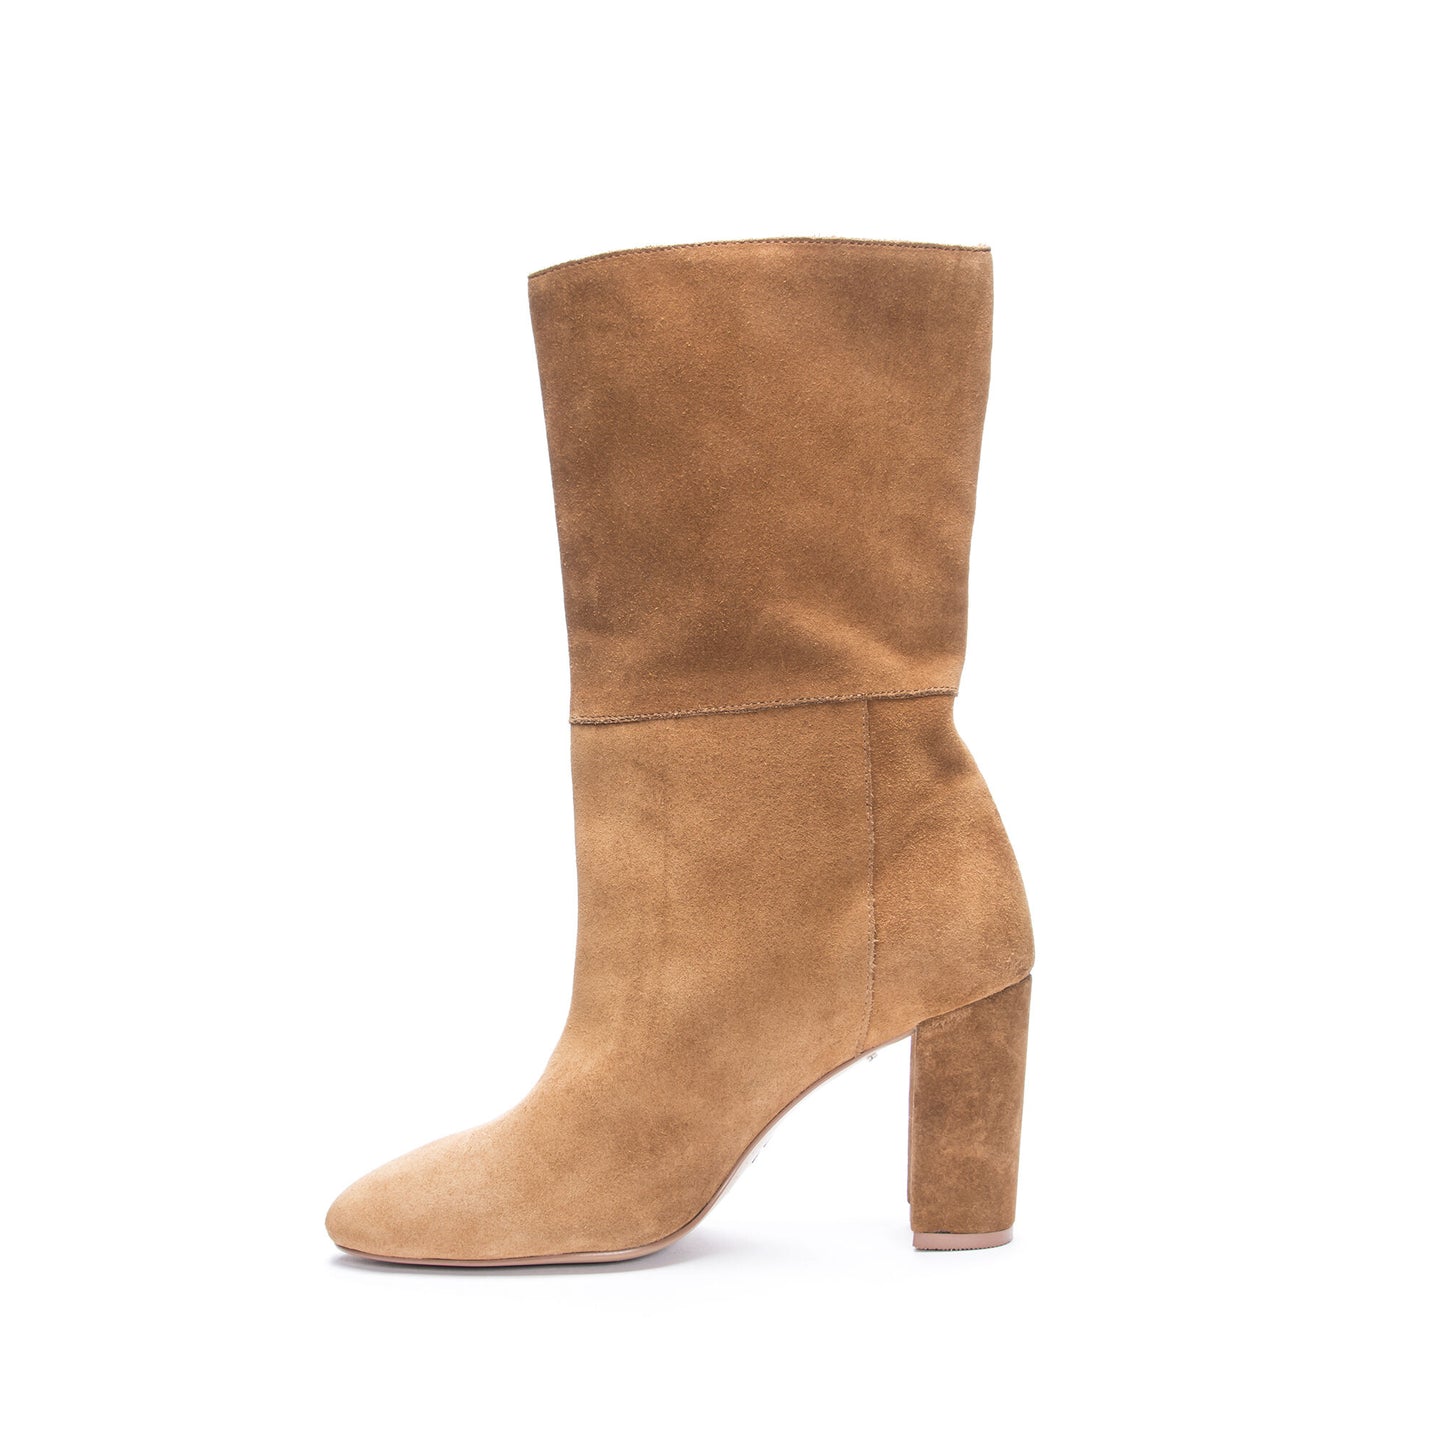 Honey Brown Suede Boots